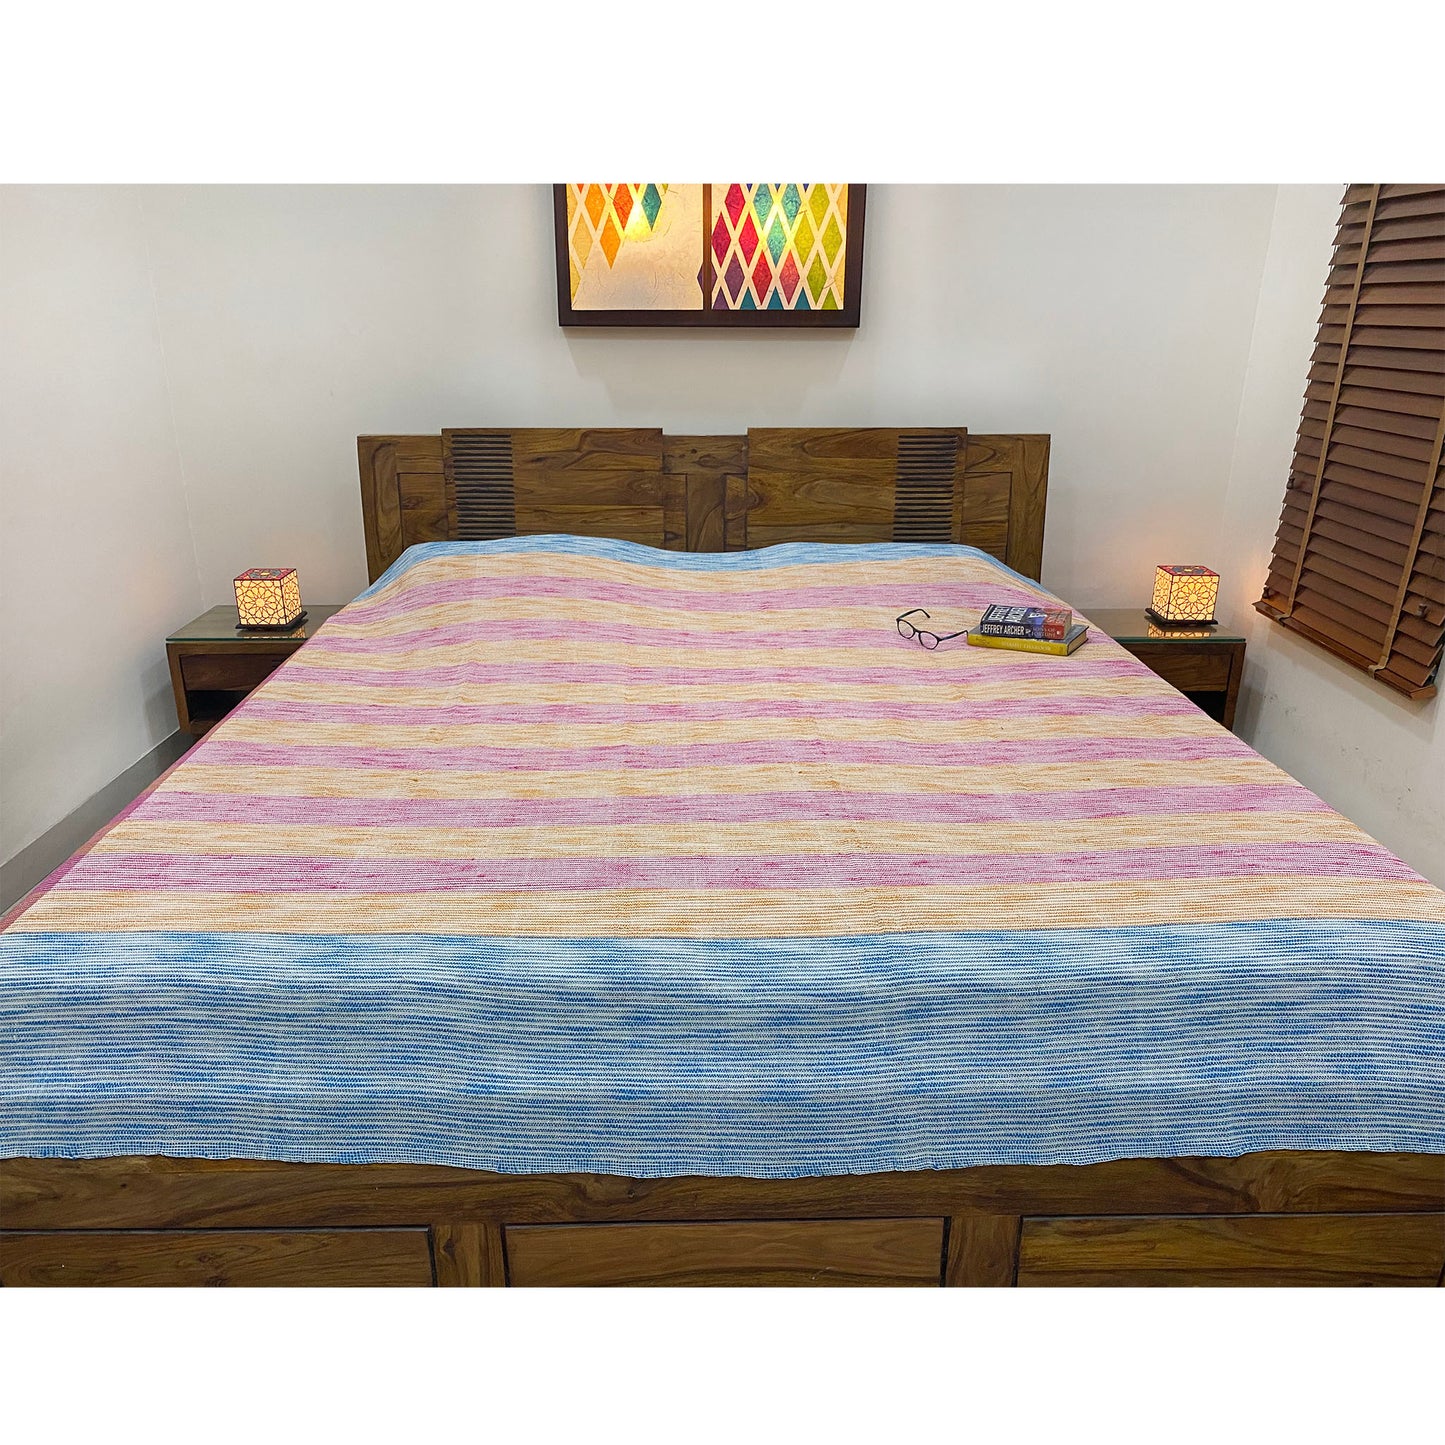 pretty-handloom-double-bed-cover-for-gifting